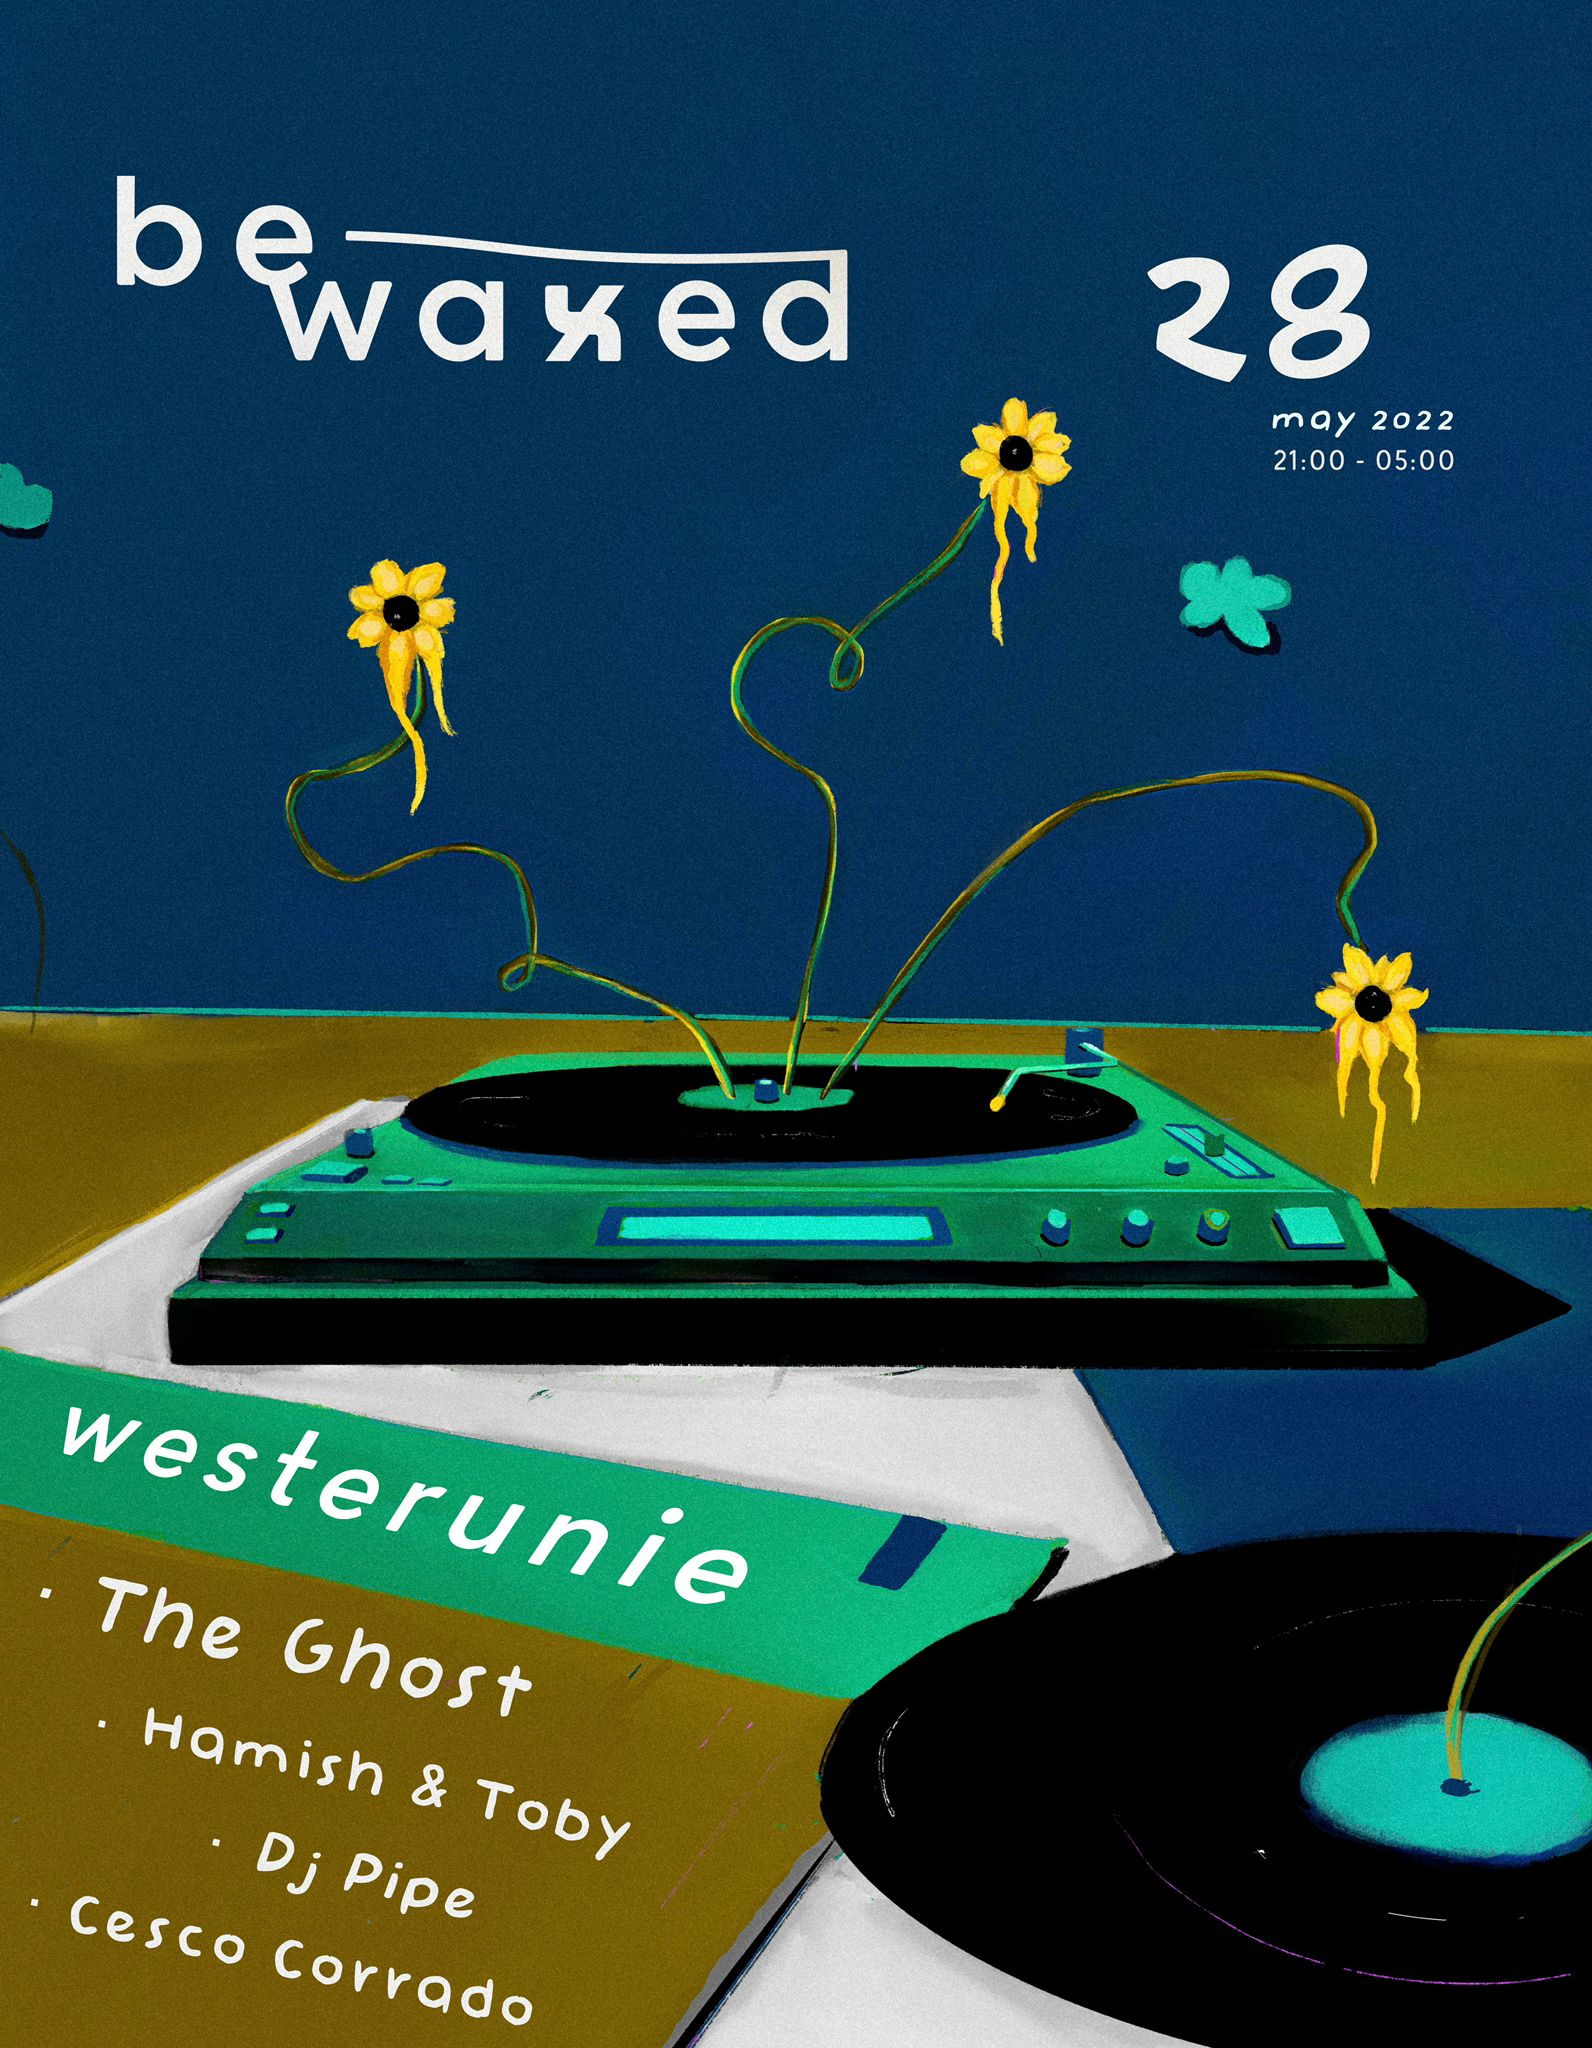 Bewaxed The Ghost Hamish Toby Dj Pipe And Cesco Corrado At Westerunie Amsterdam